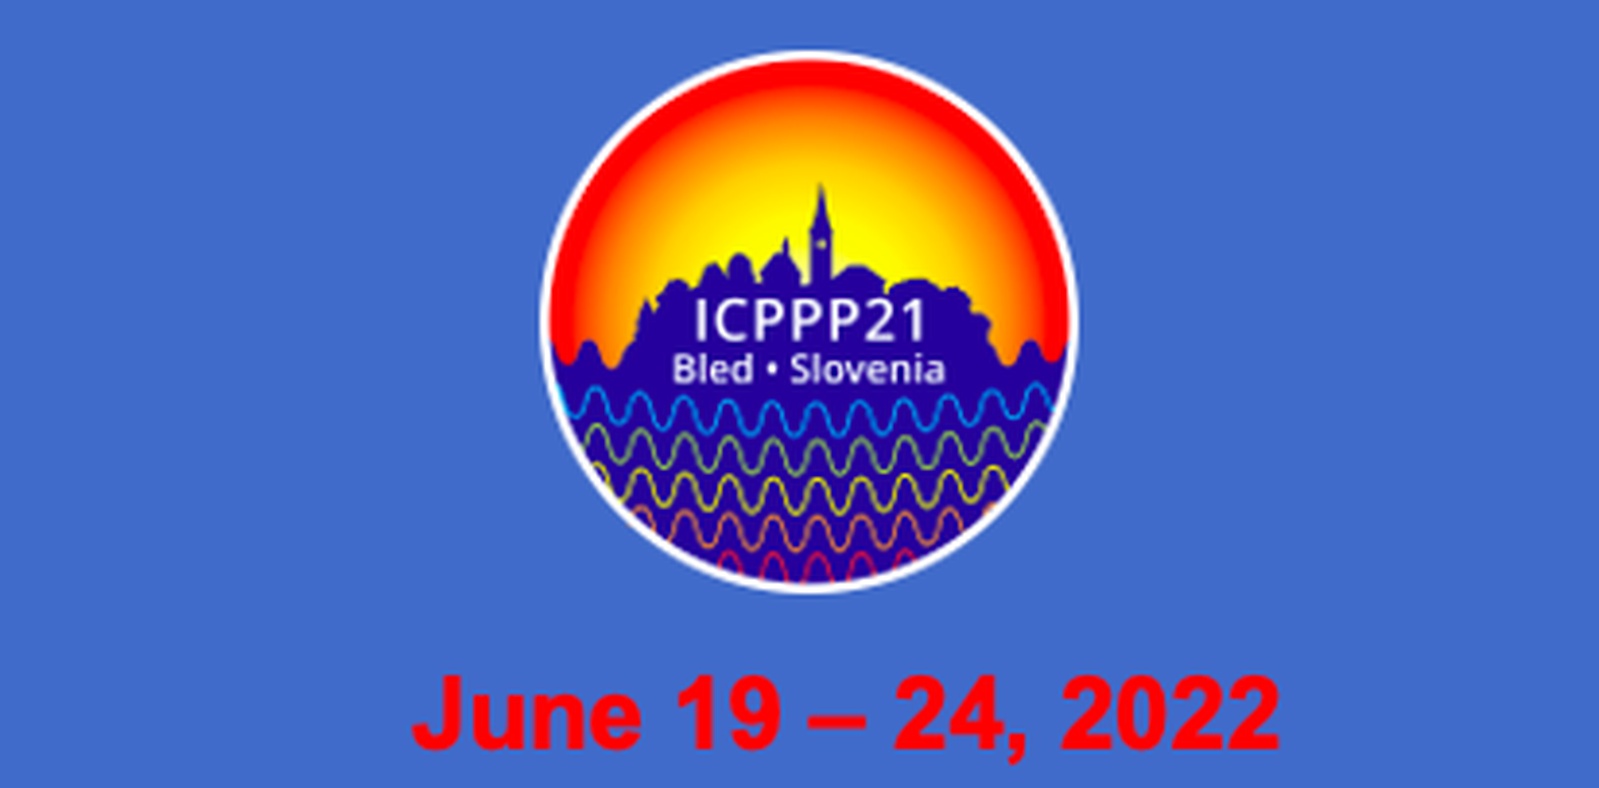 21st International Conference on Photoacoustic and Photothermal Phenomena – ICPPP21